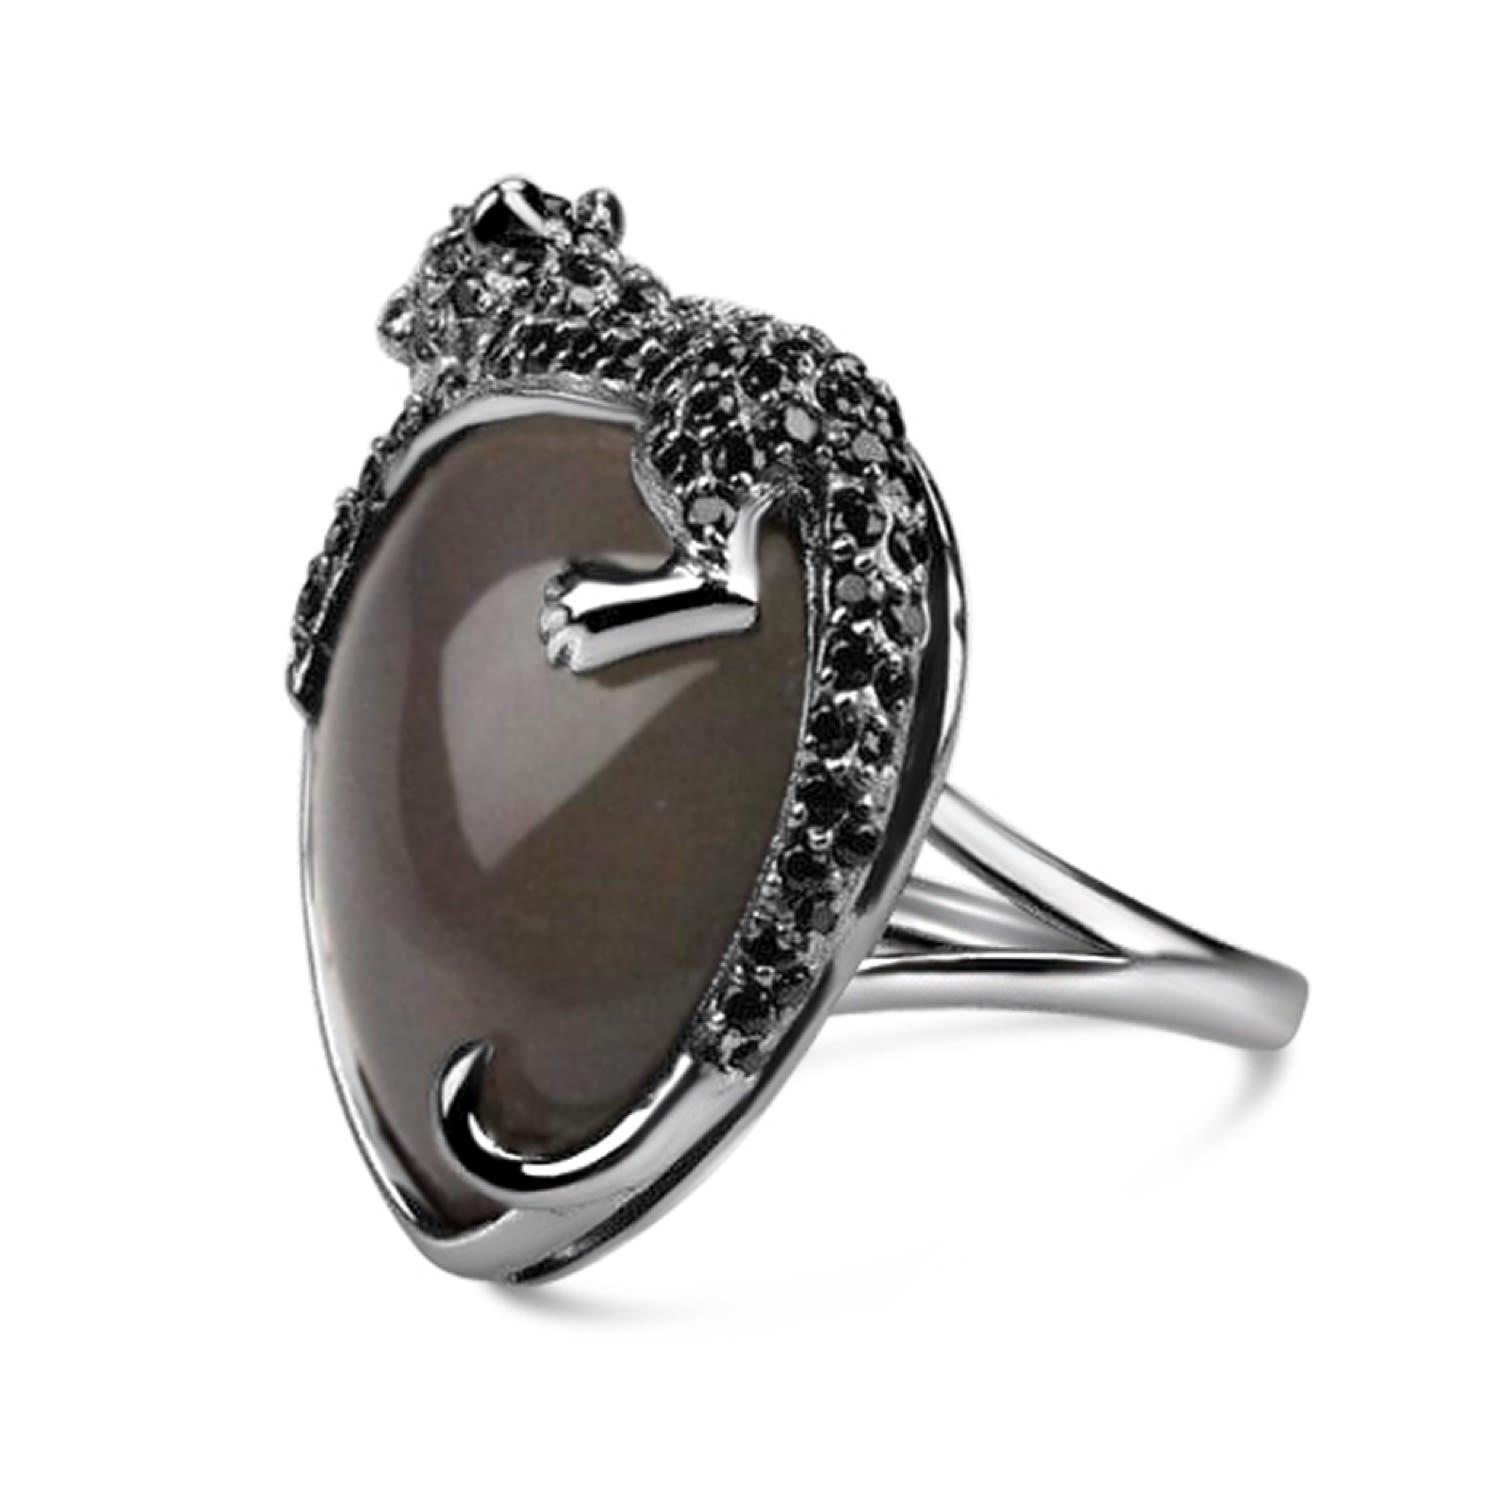 Bellus Domina Agate Umbra Black Panther Cocktail Ring in Grey (Gray) - Lyst